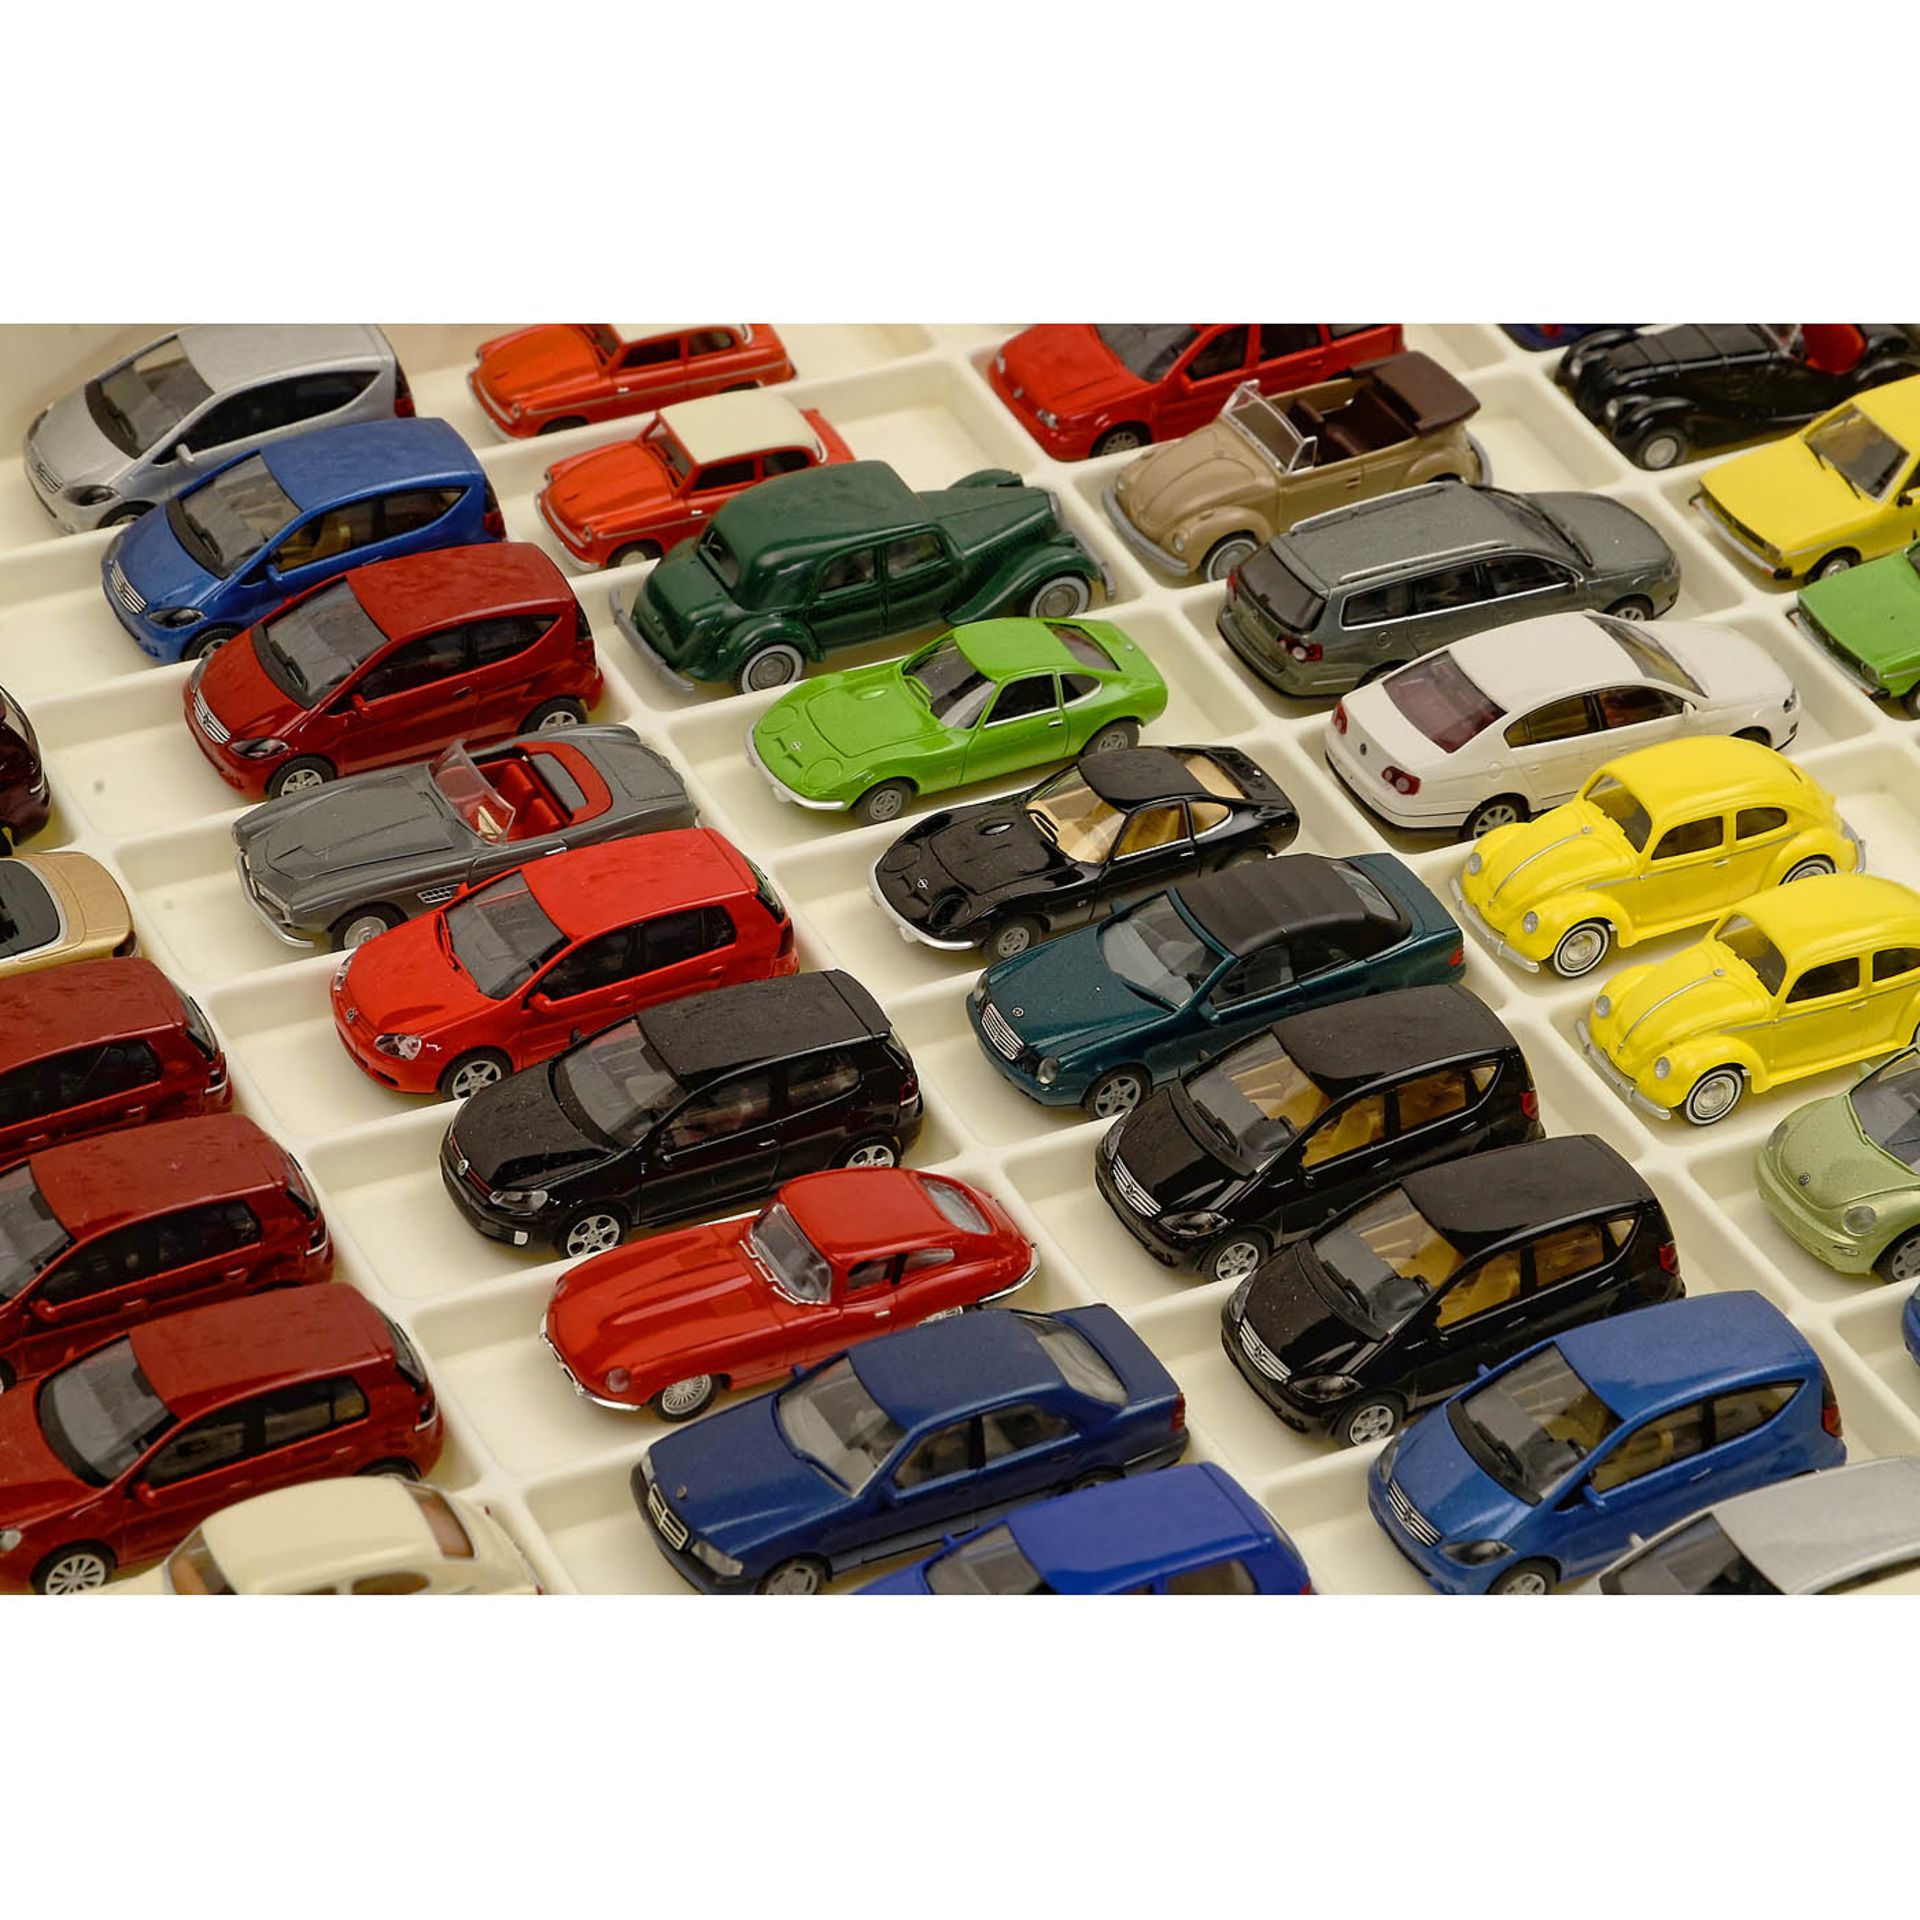 Large Collection of 1:87 Scale Model Cars - Image 8 of 9